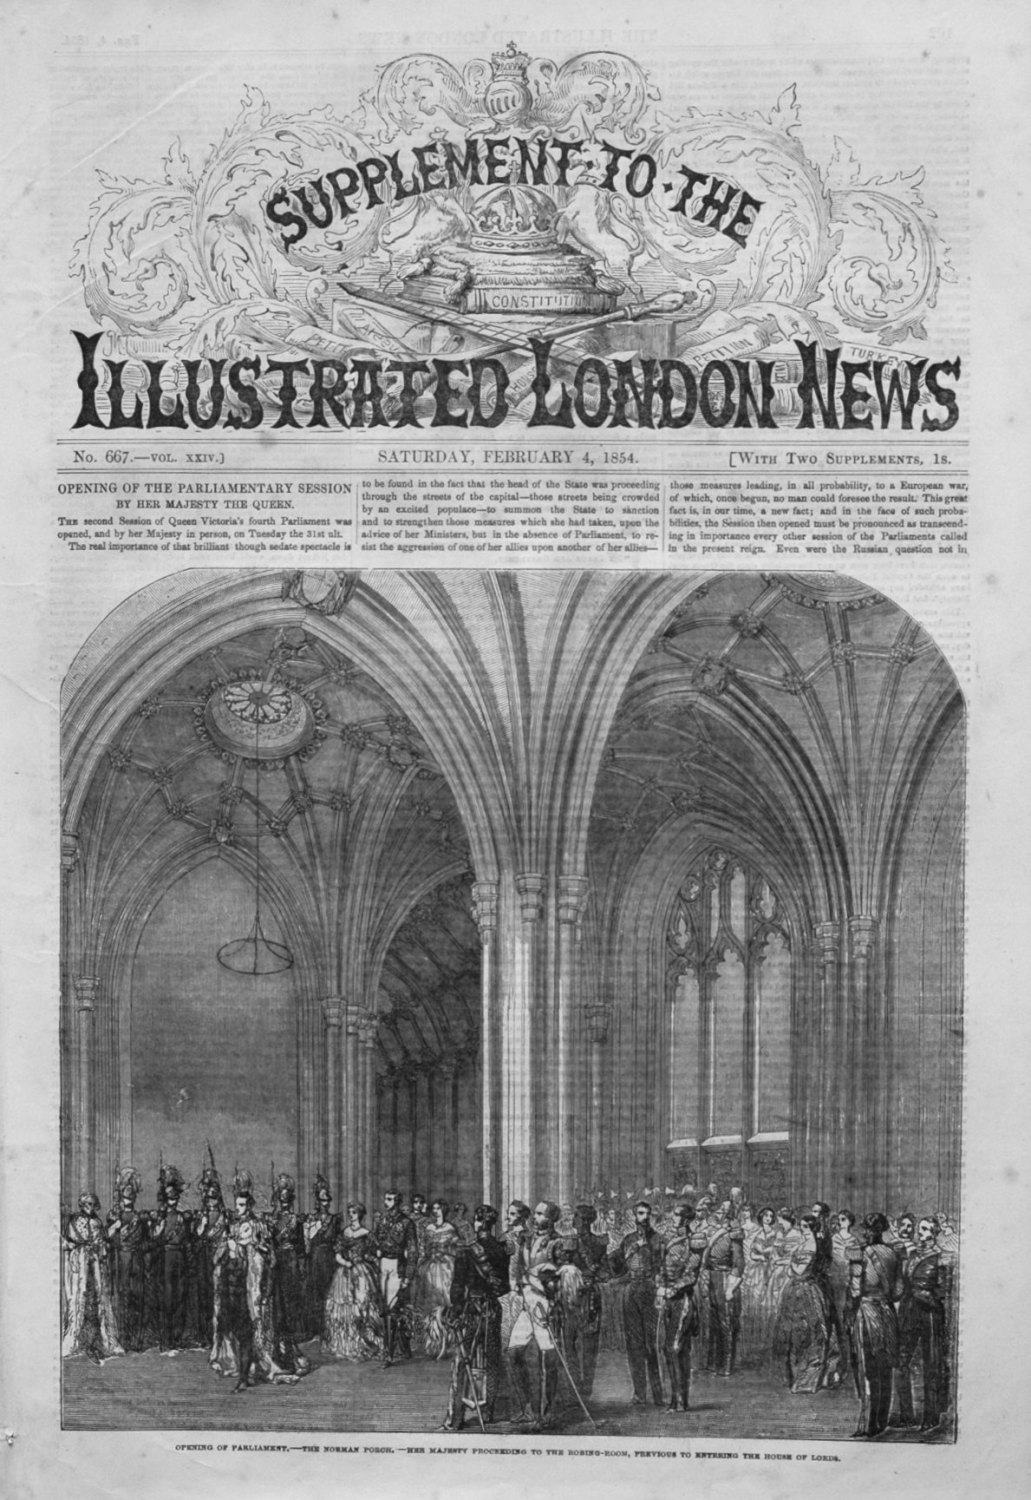 Illustrated London News (Supplement) for February 4th 1854.